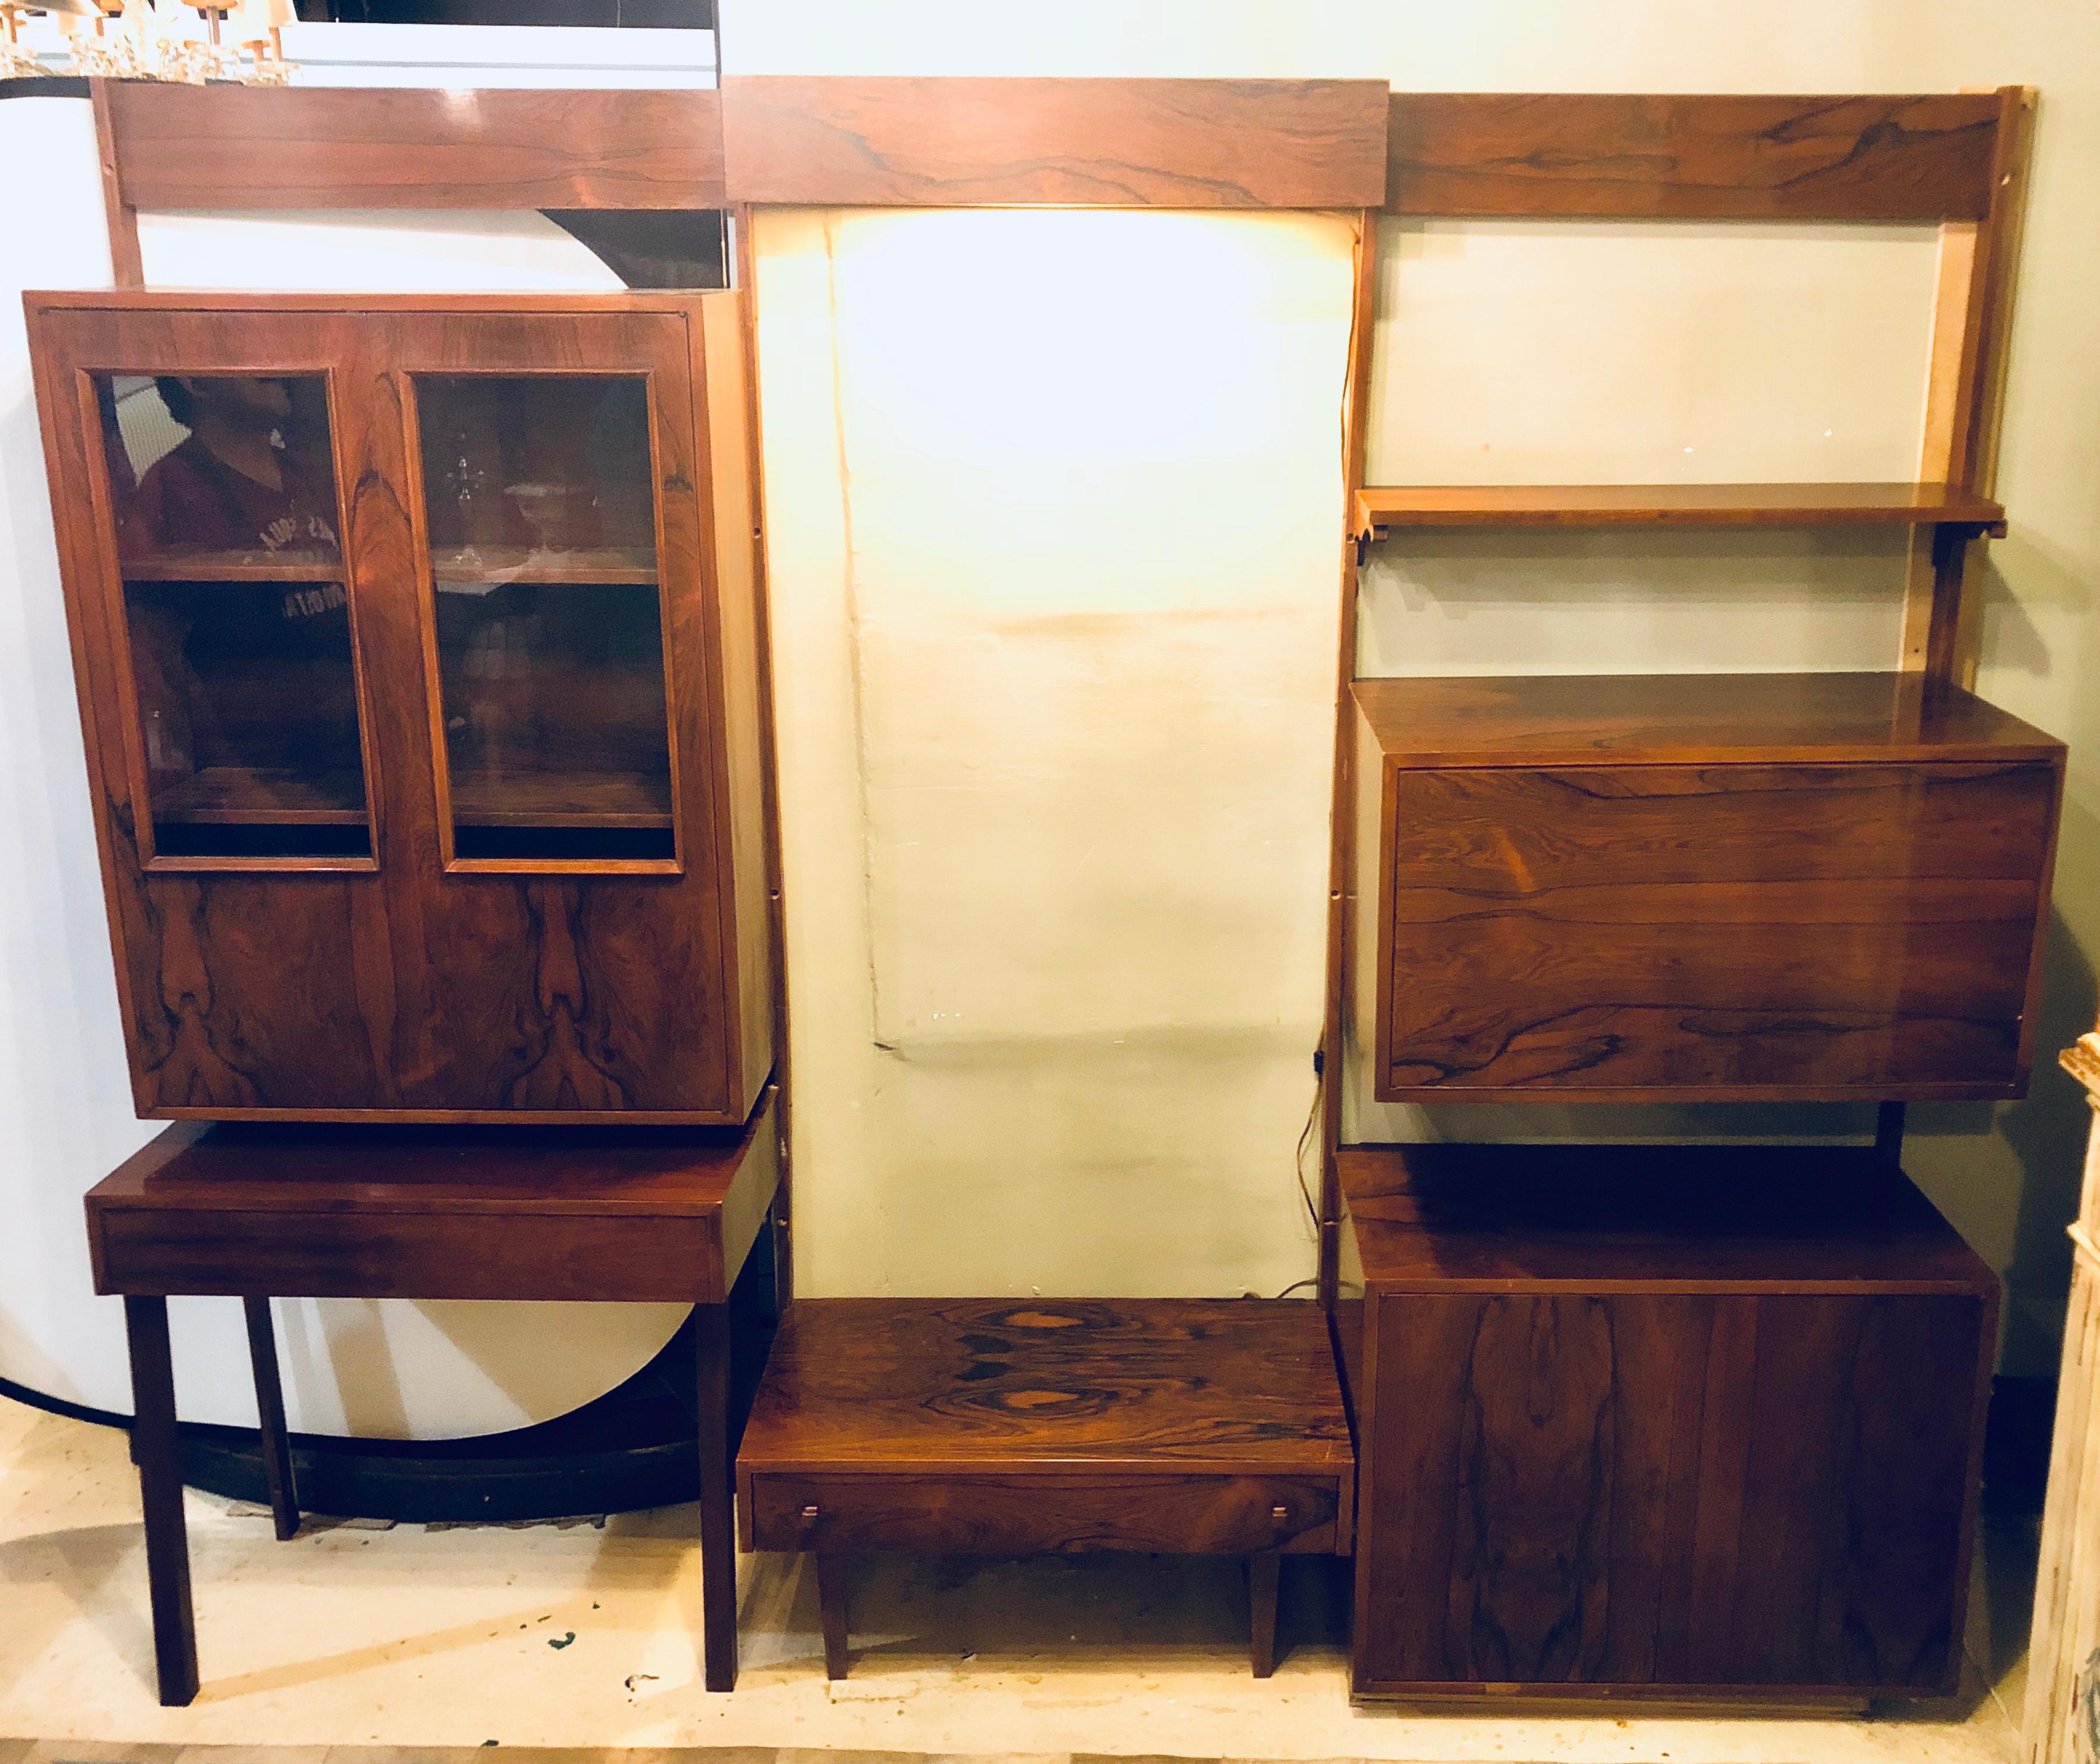 20th Century Midentury Rosewood Wall-Unit Including Table, Desk, Curio Cabinet and Light